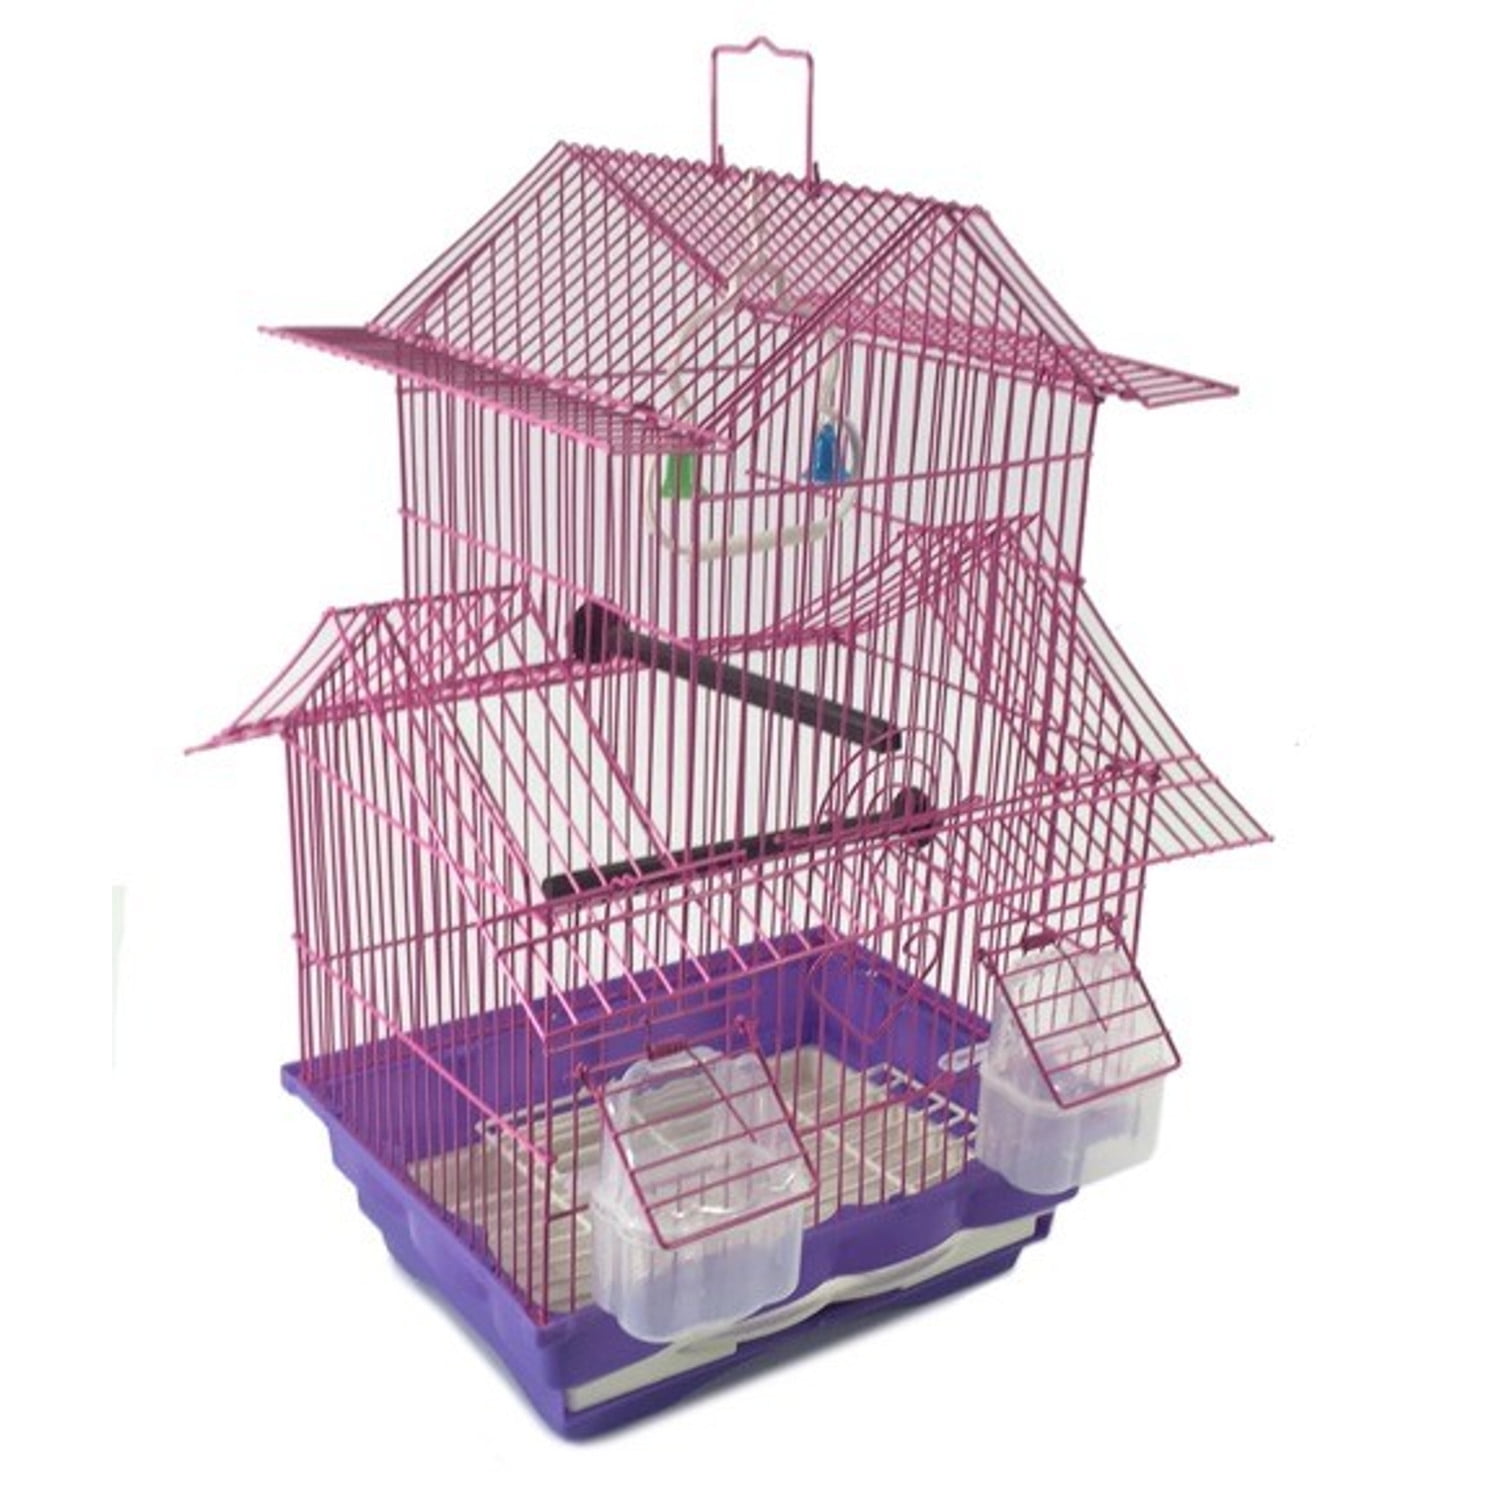 EDMBG Pink 18inch Medium Parakeet Wire Bird Cage for 1 or